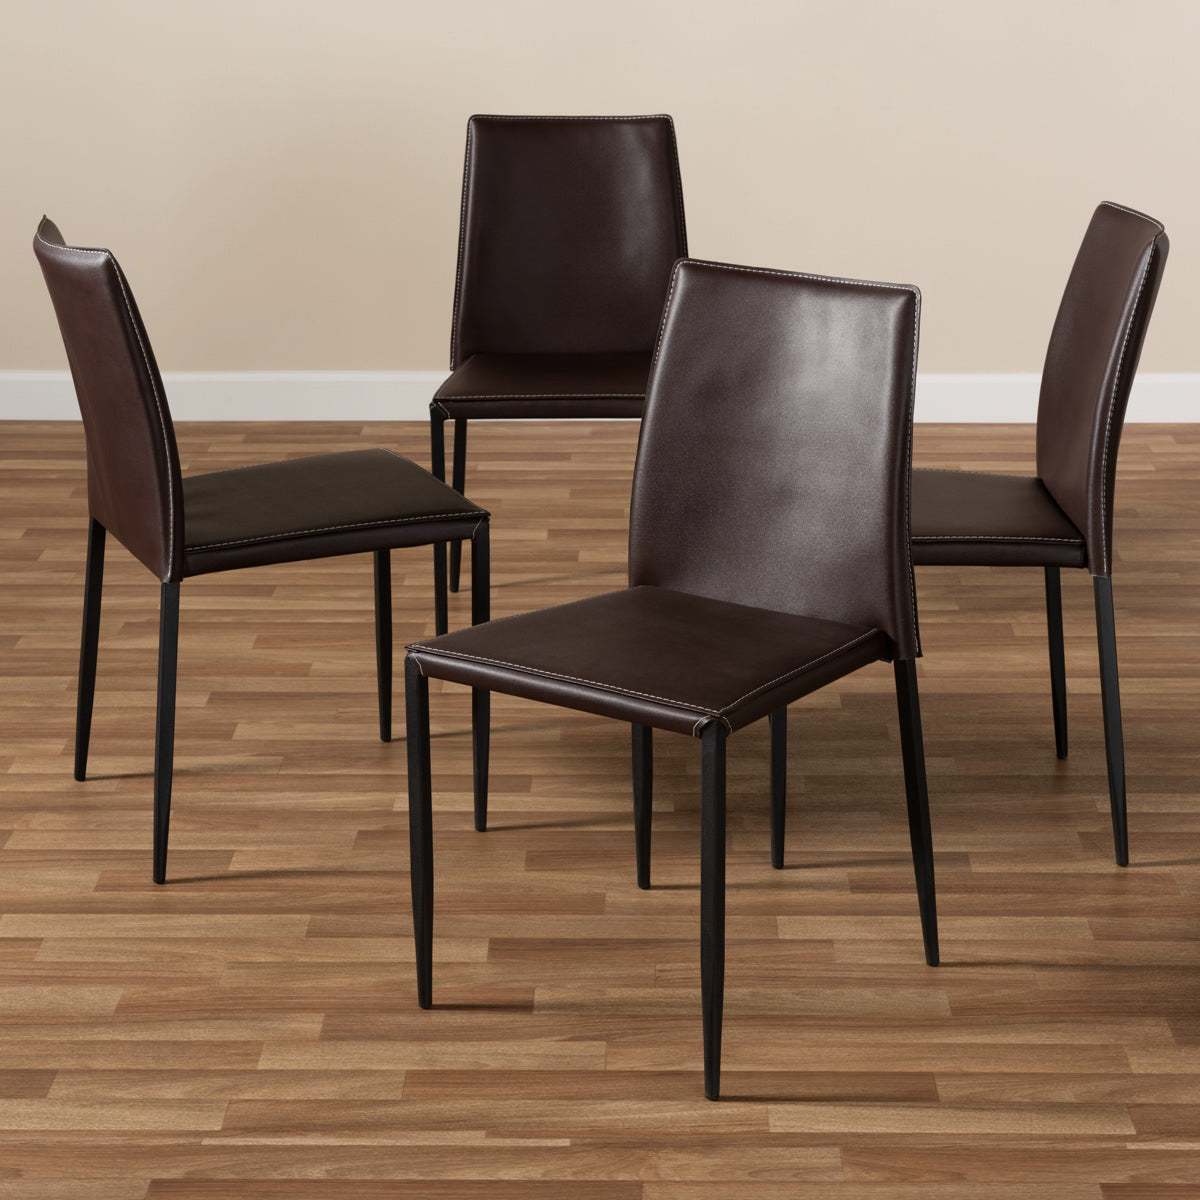 Baxton Studio Pascha Modern and Contemporary Brown Faux Leather Upholstered Dining Chair (Set of 4) Baxton Studio-dining chair-Minimal And Modern - 4